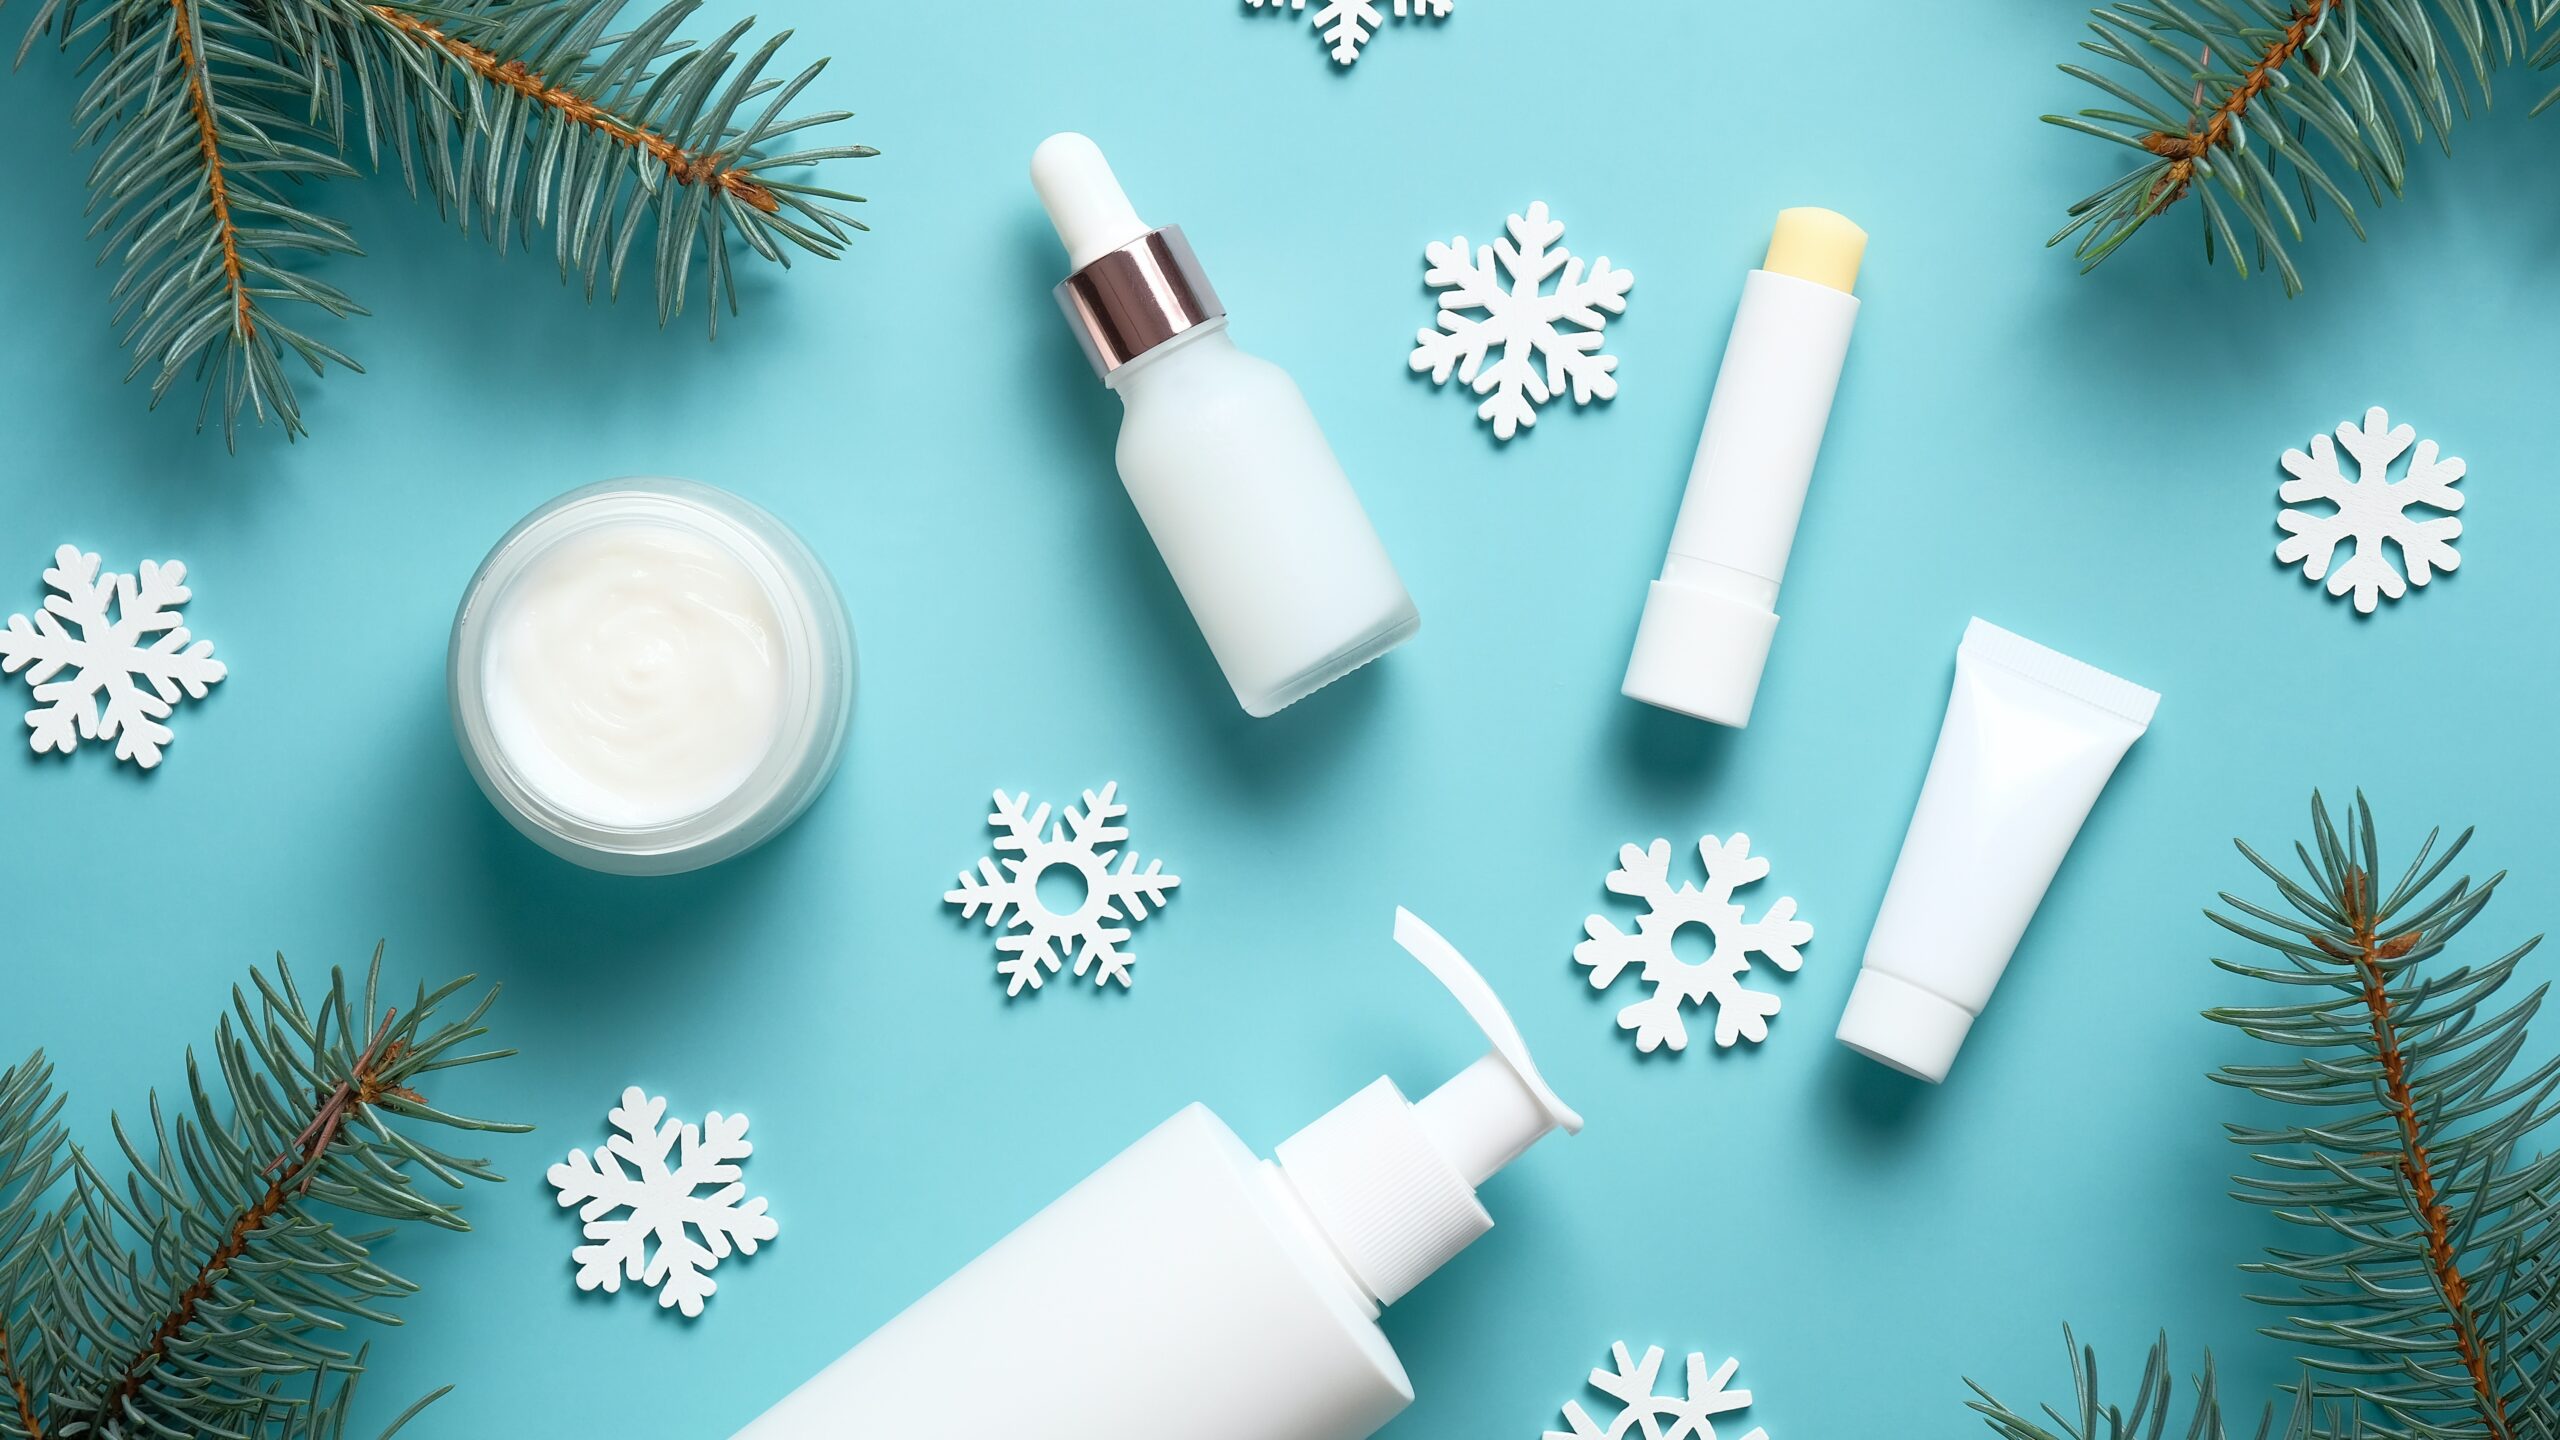 6 Winter Packaging Trends Refreshing to Your Audience